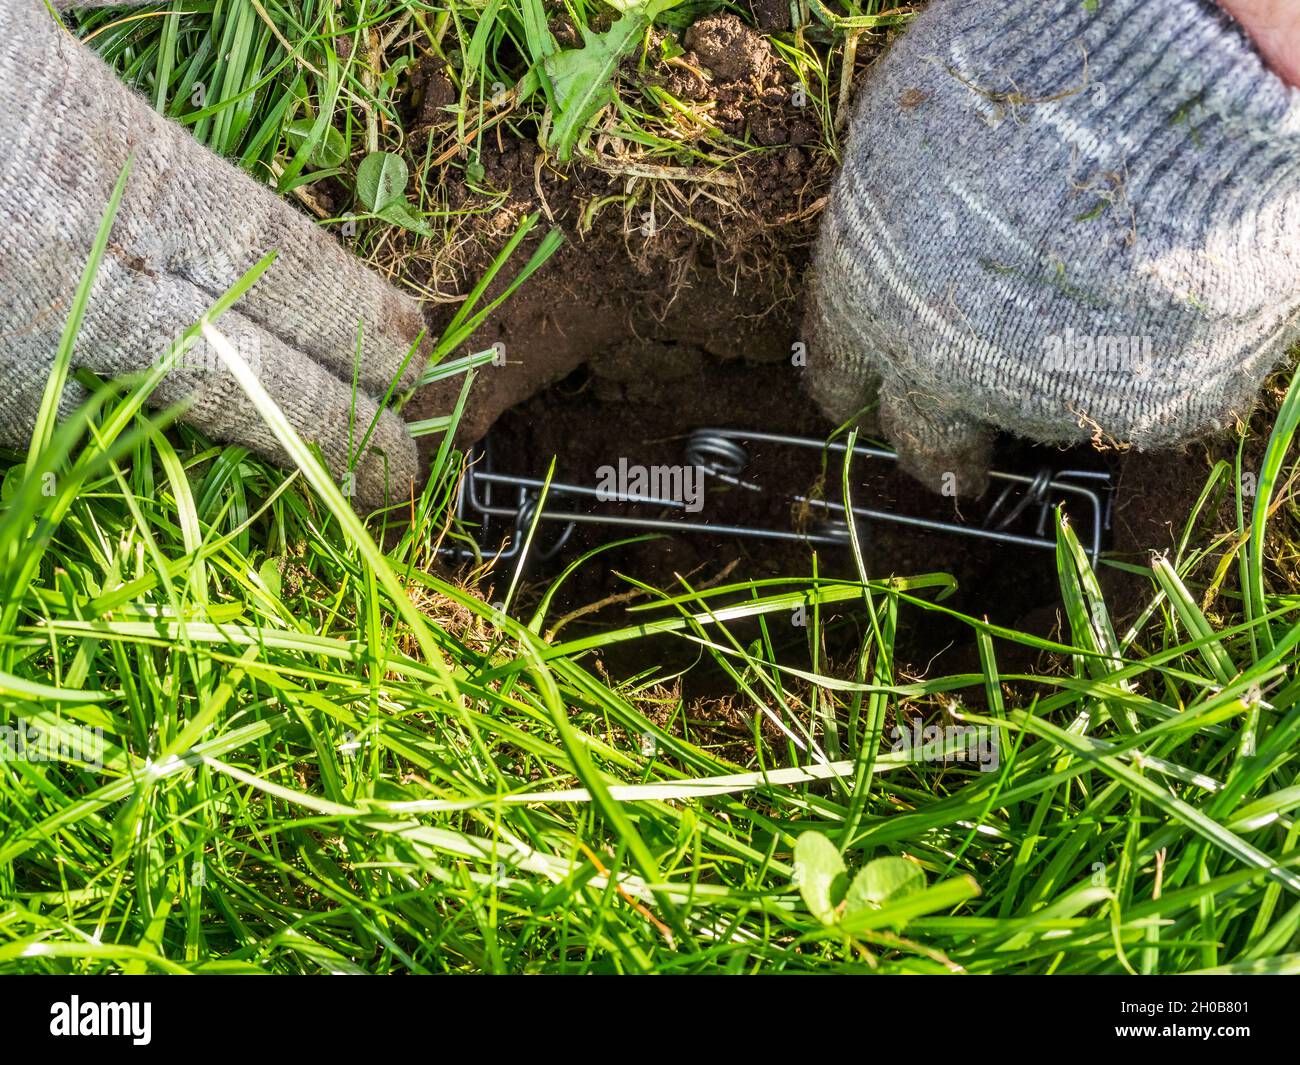 Gardener sets up a mole trap on the lawn in mole hole. Step 4 by step instruction. Stock Photo